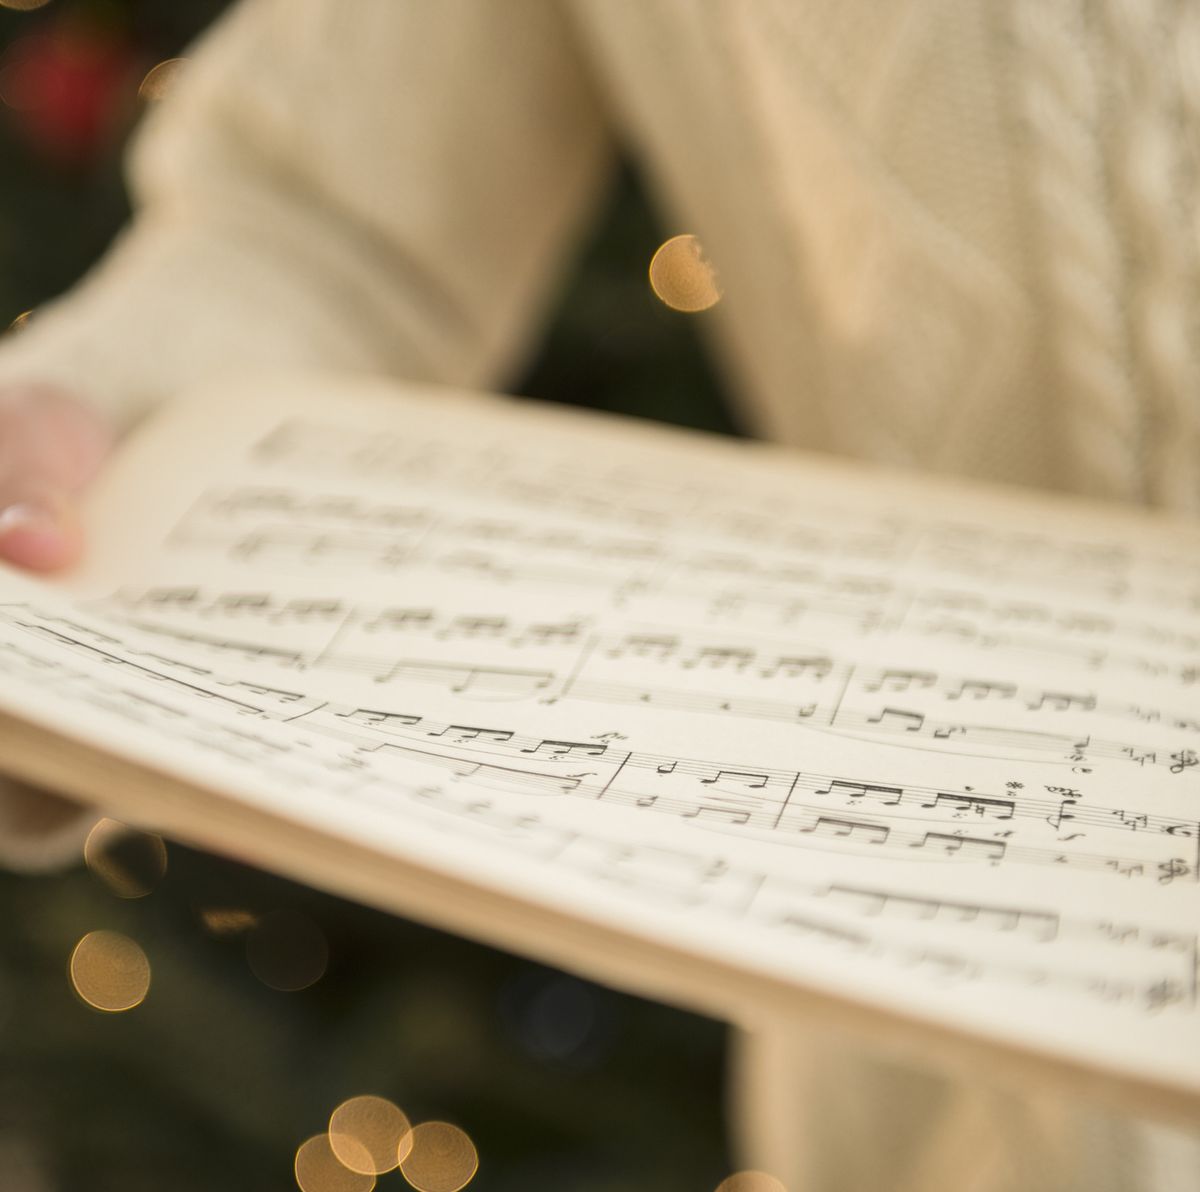 Gospel Tract – The Meaning of Christmas – Moments With The Book